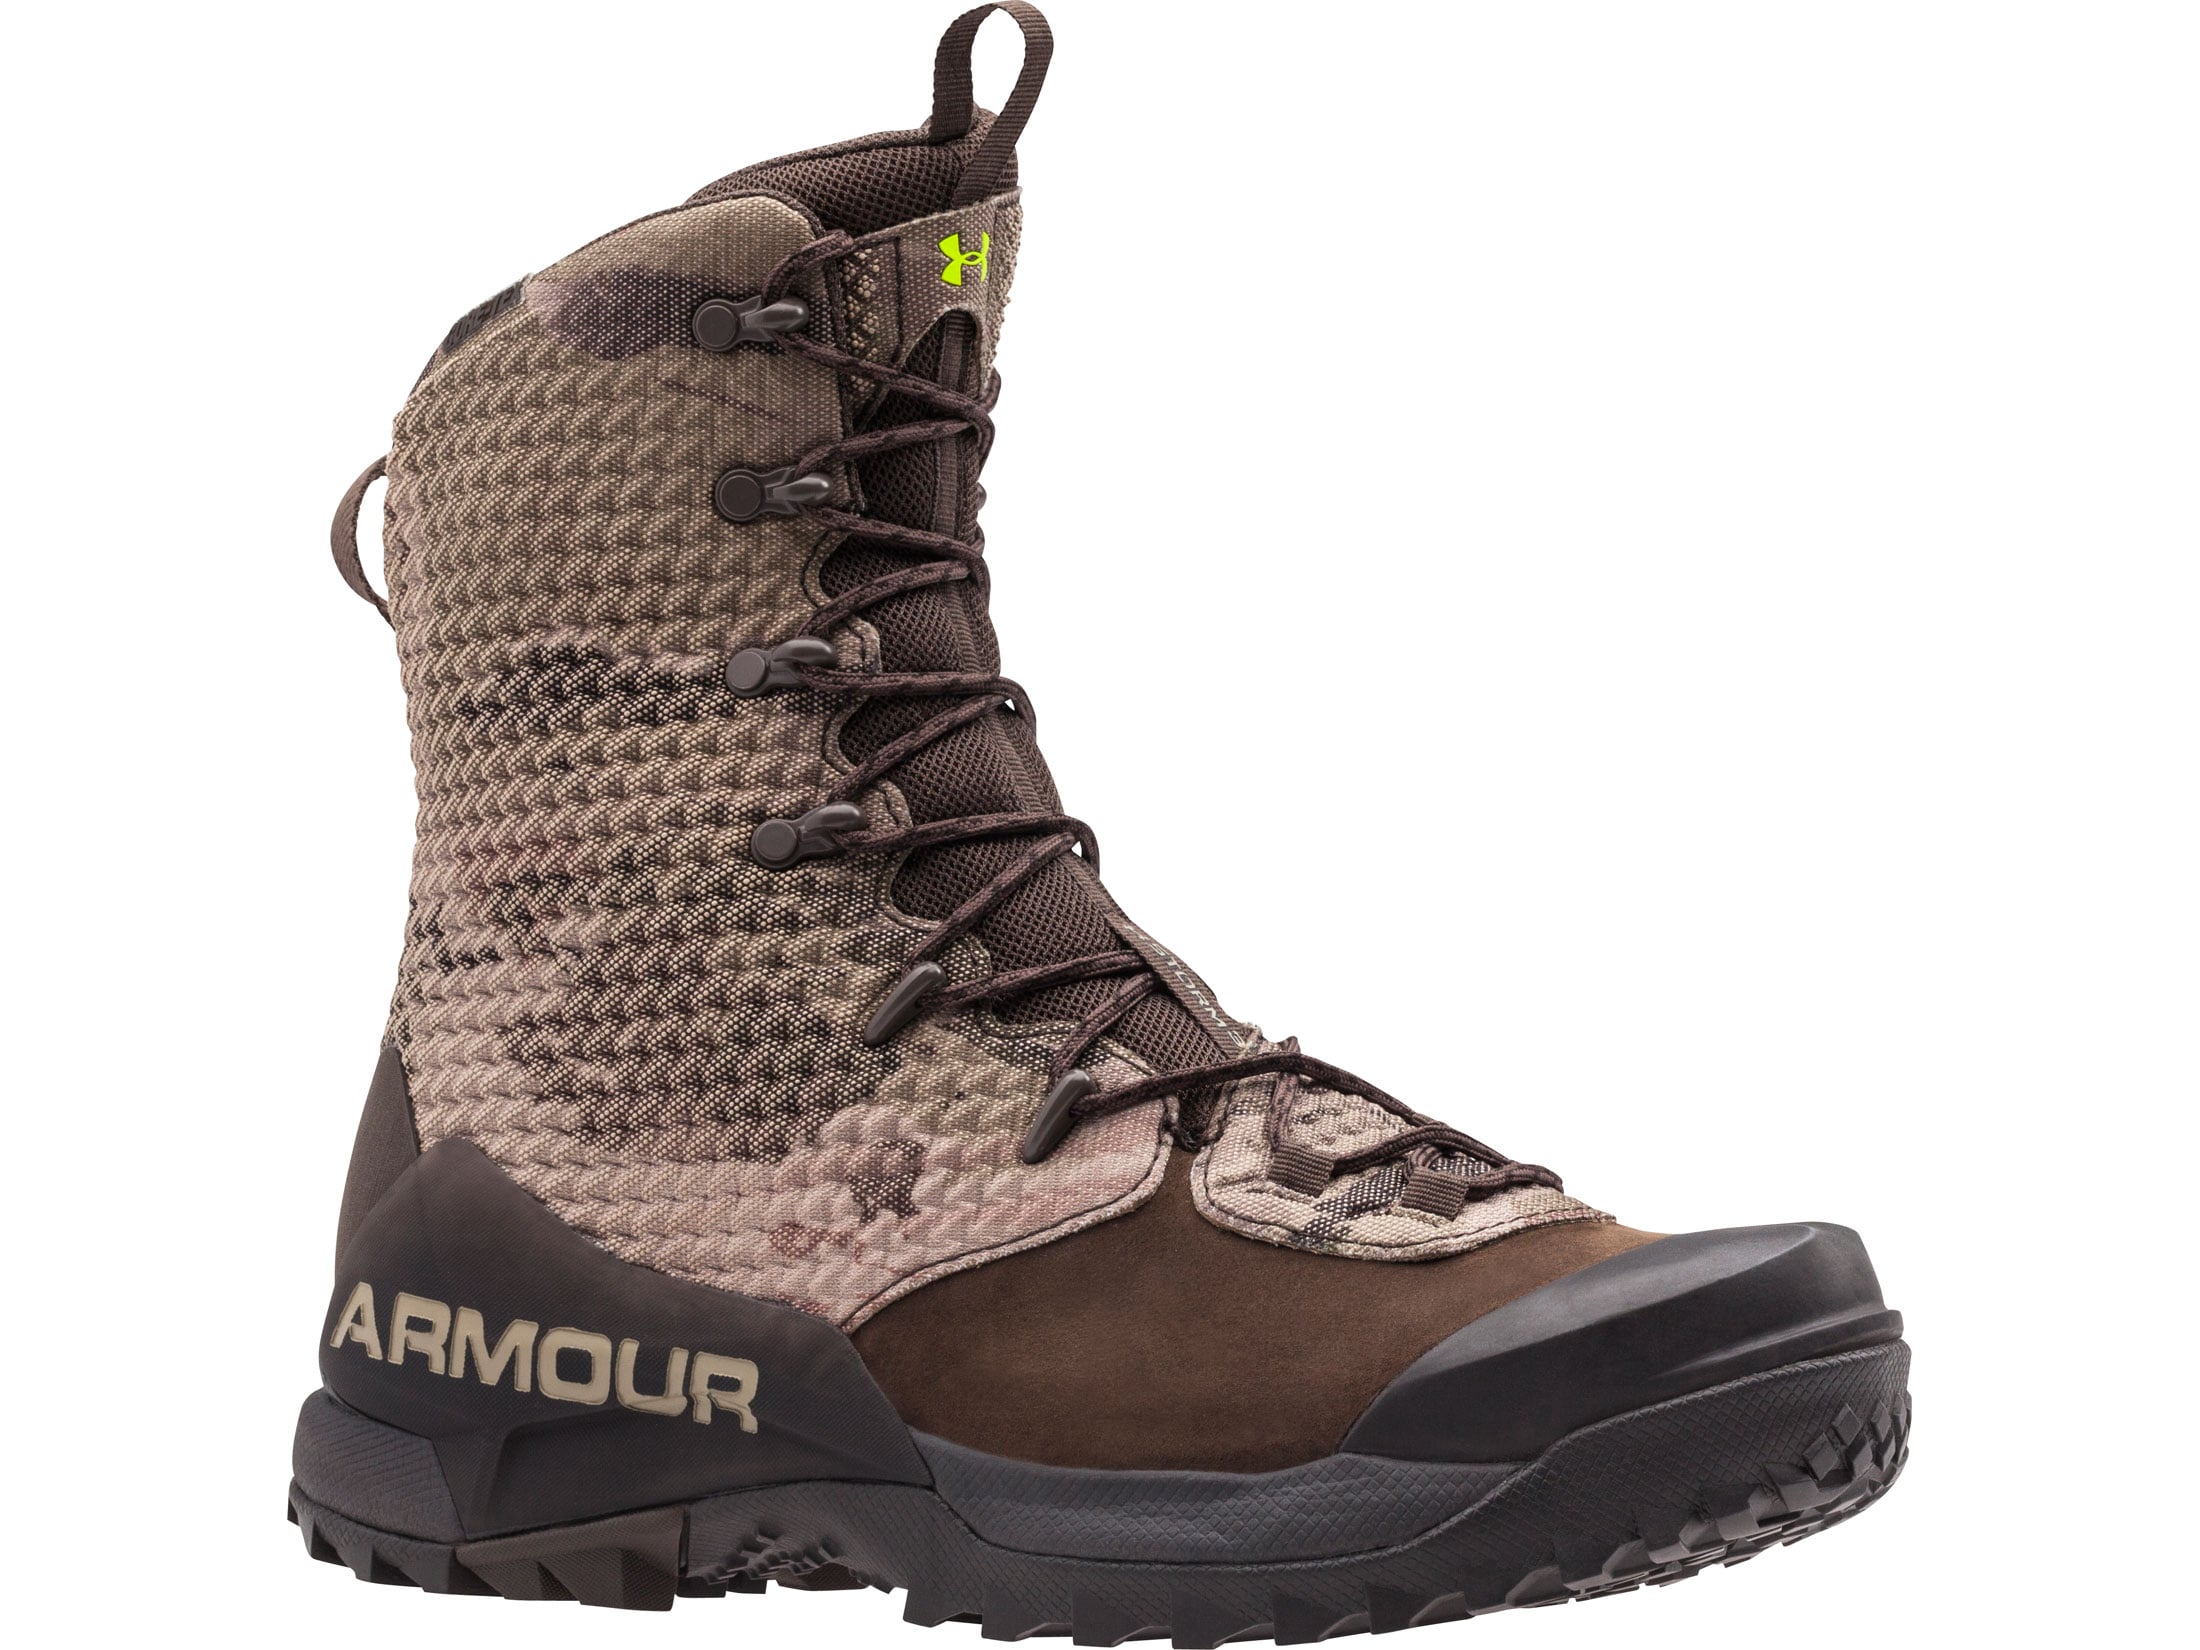 under armour work boots safety toe